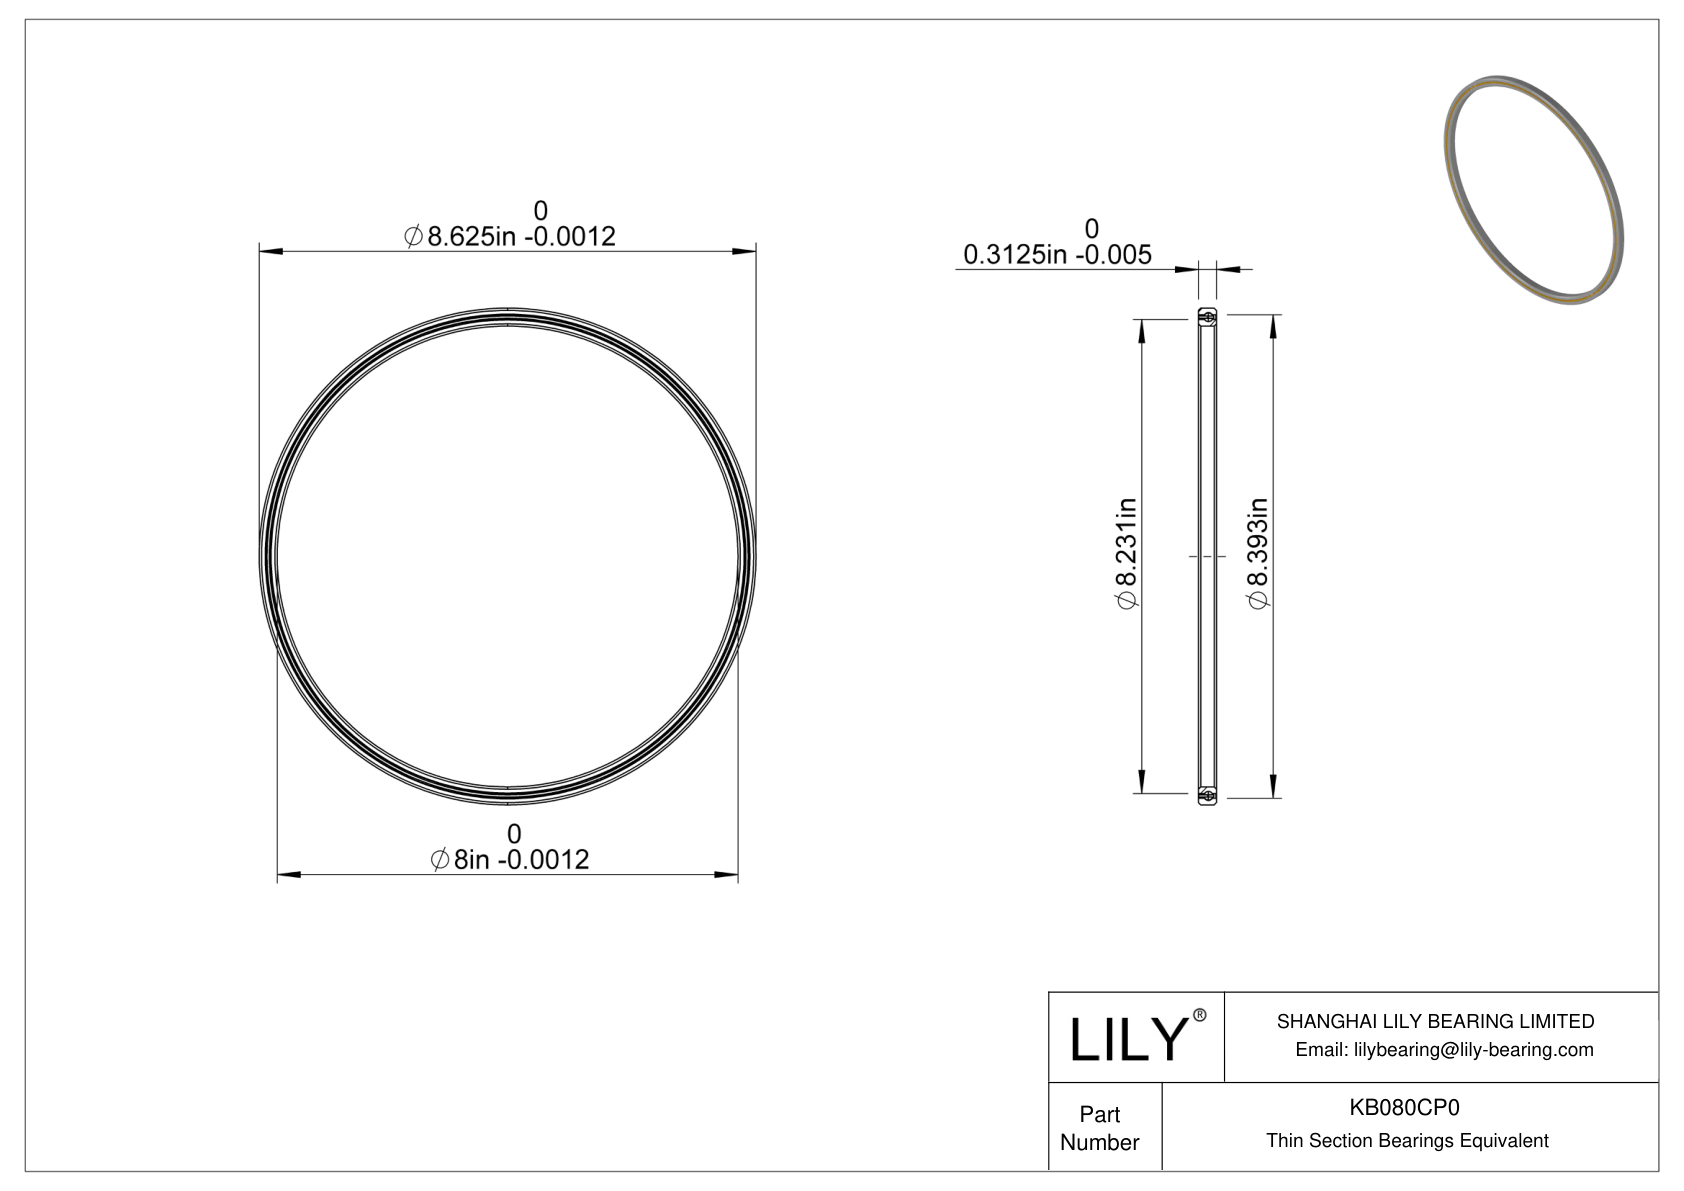 KB080CP0 Constant Section (CS) Bearings cad drawing